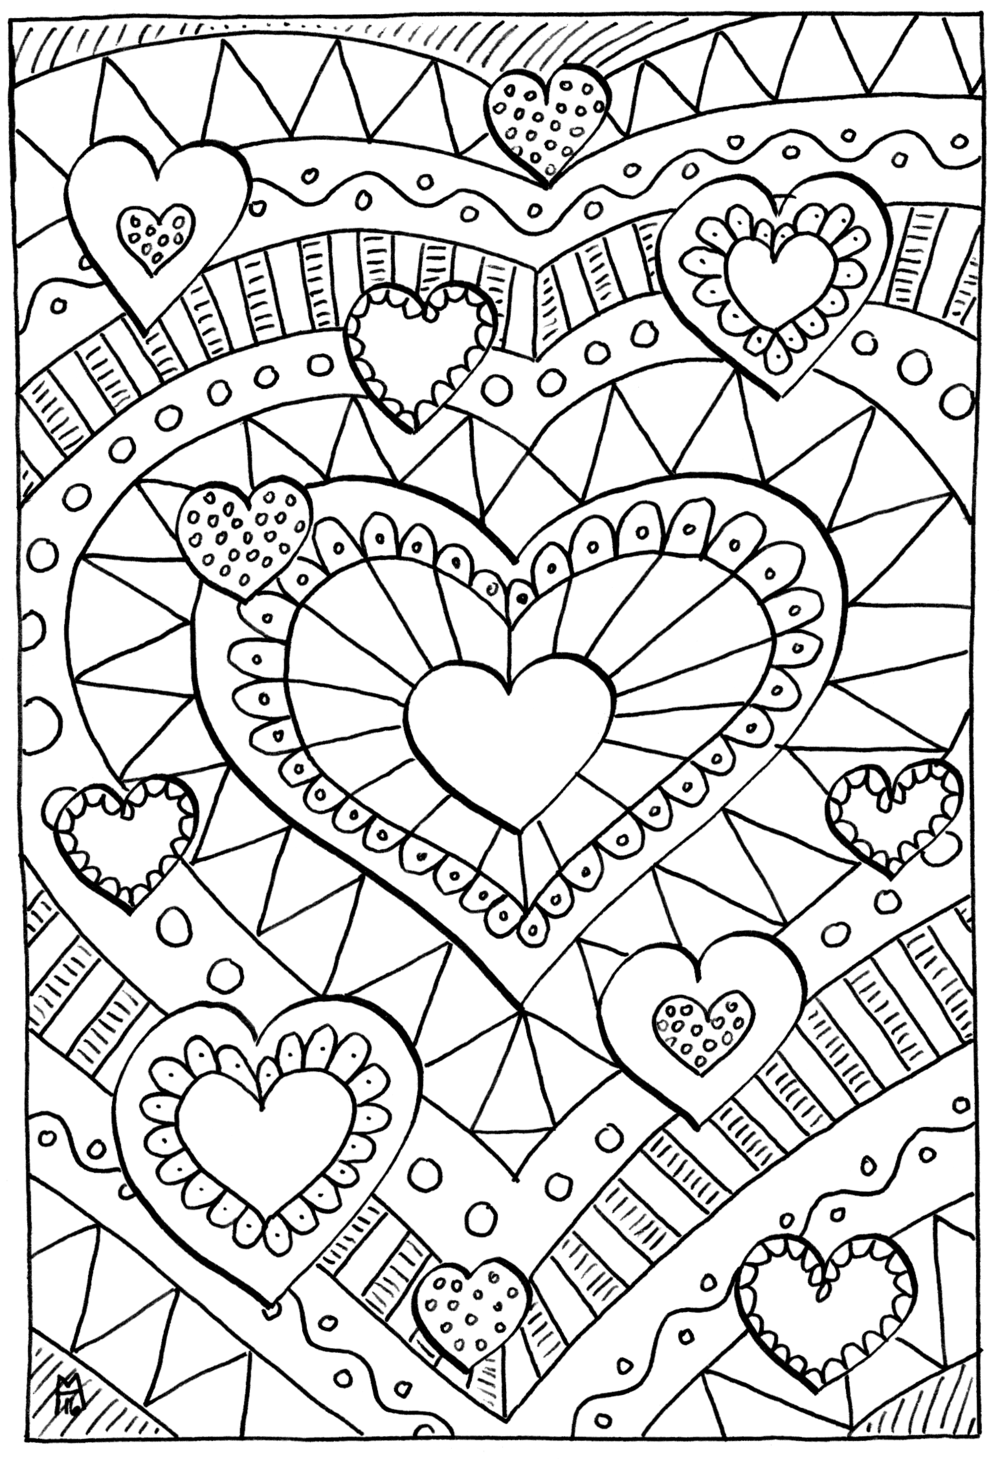 Download Healing Hearts Coloring Page | FaveCrafts.com